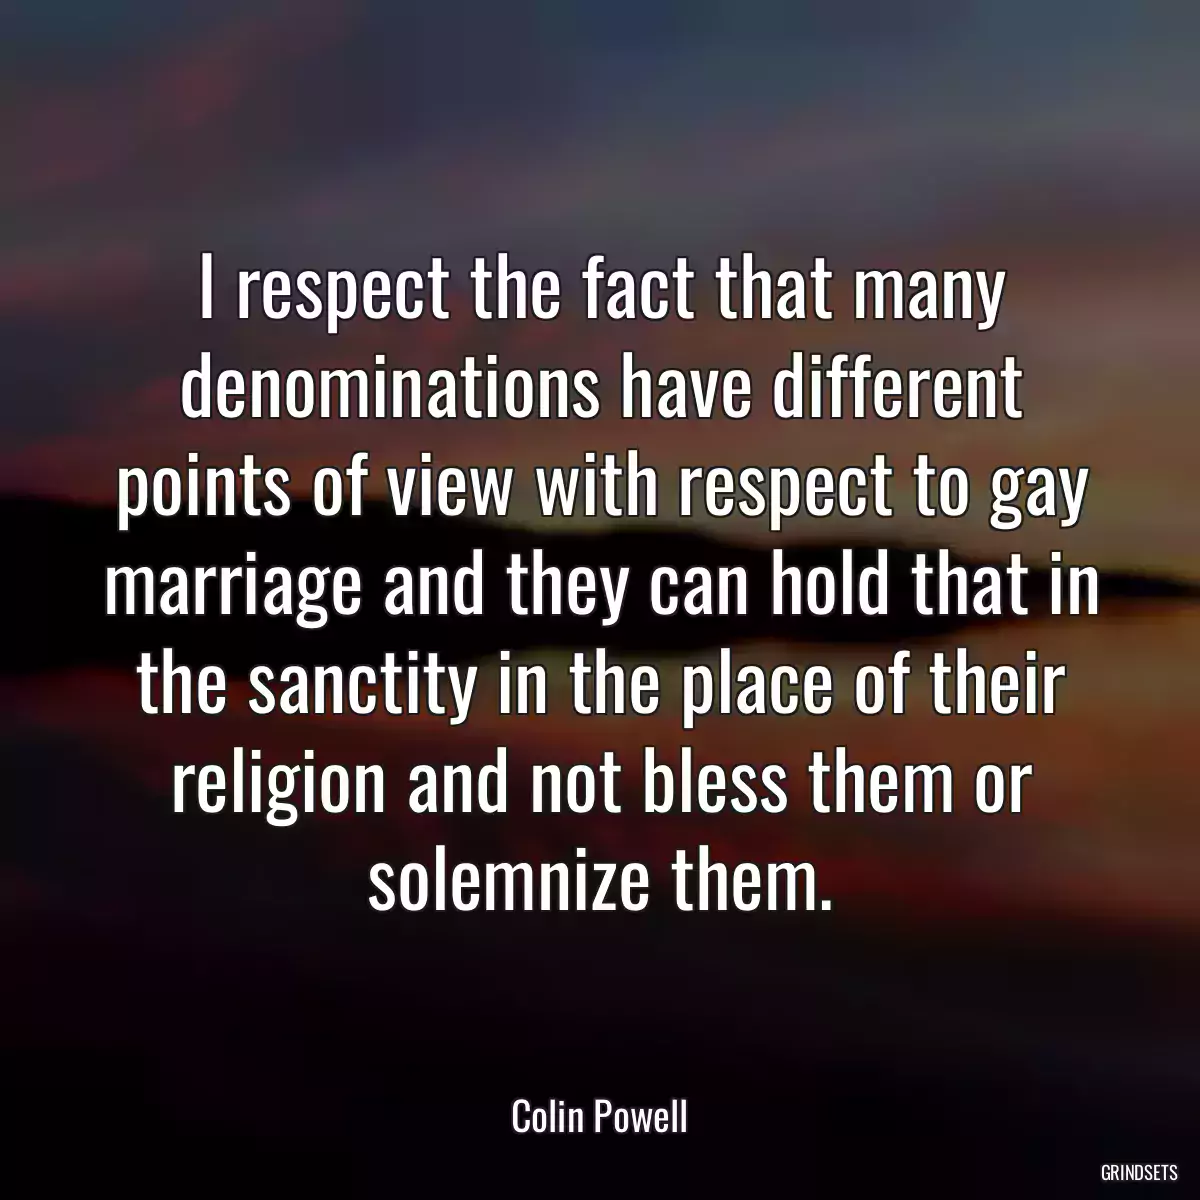 I respect the fact that many denominations have different points of view with respect to gay marriage and they can hold that in the sanctity in the place of their religion and not bless them or solemnize them.